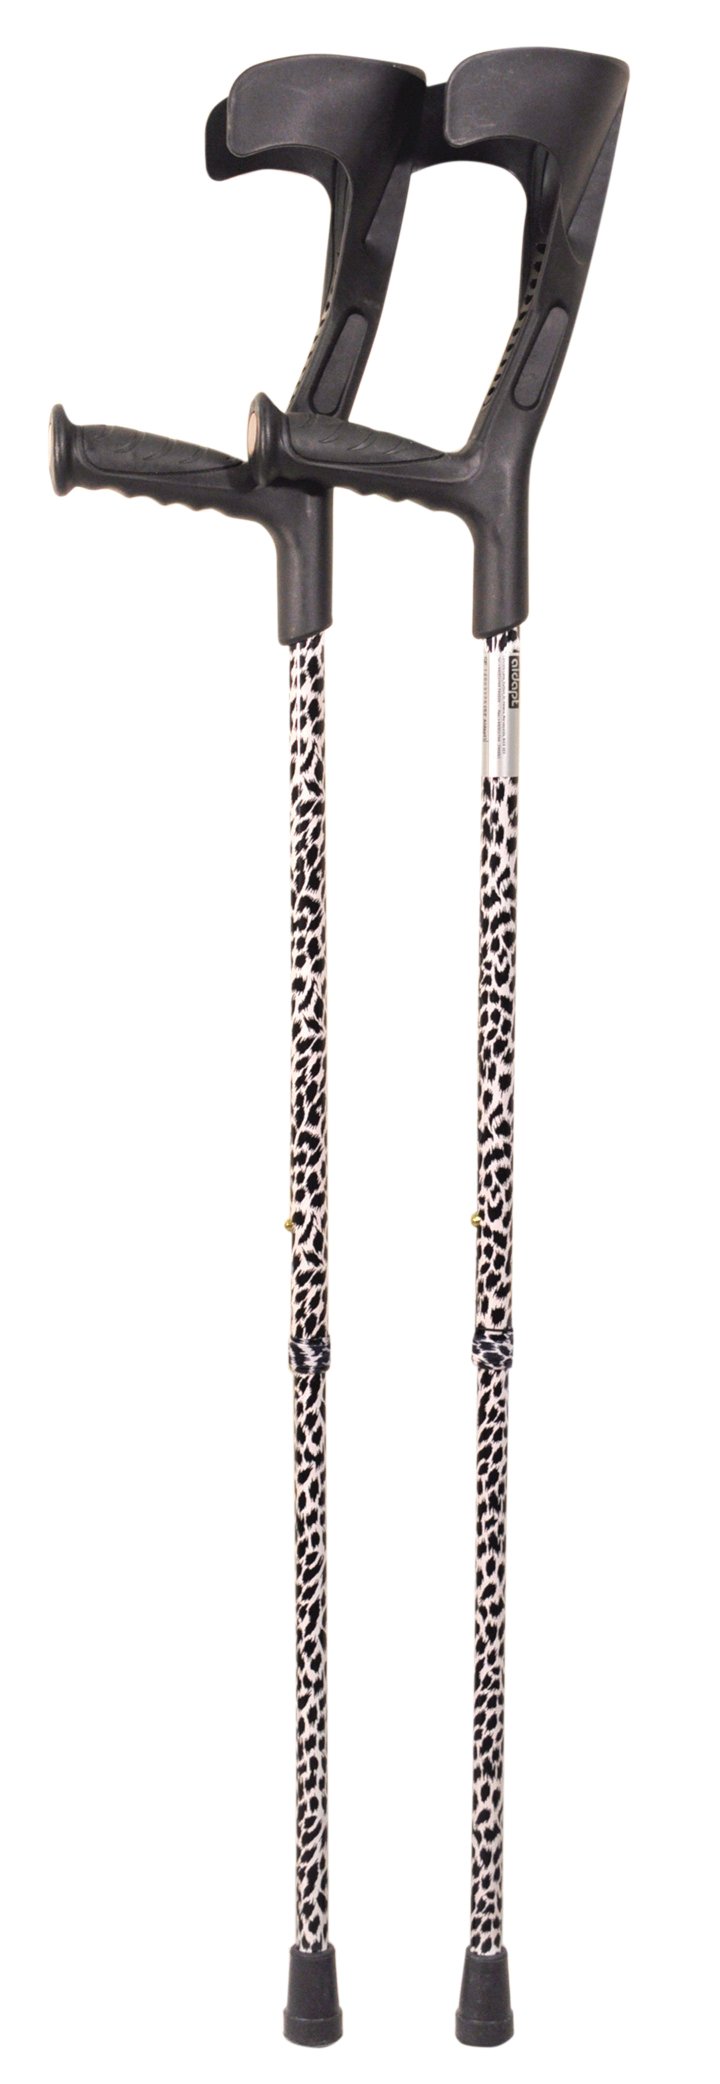 Deluxe Patterned Forearm Crutches (Pair) Black & White 